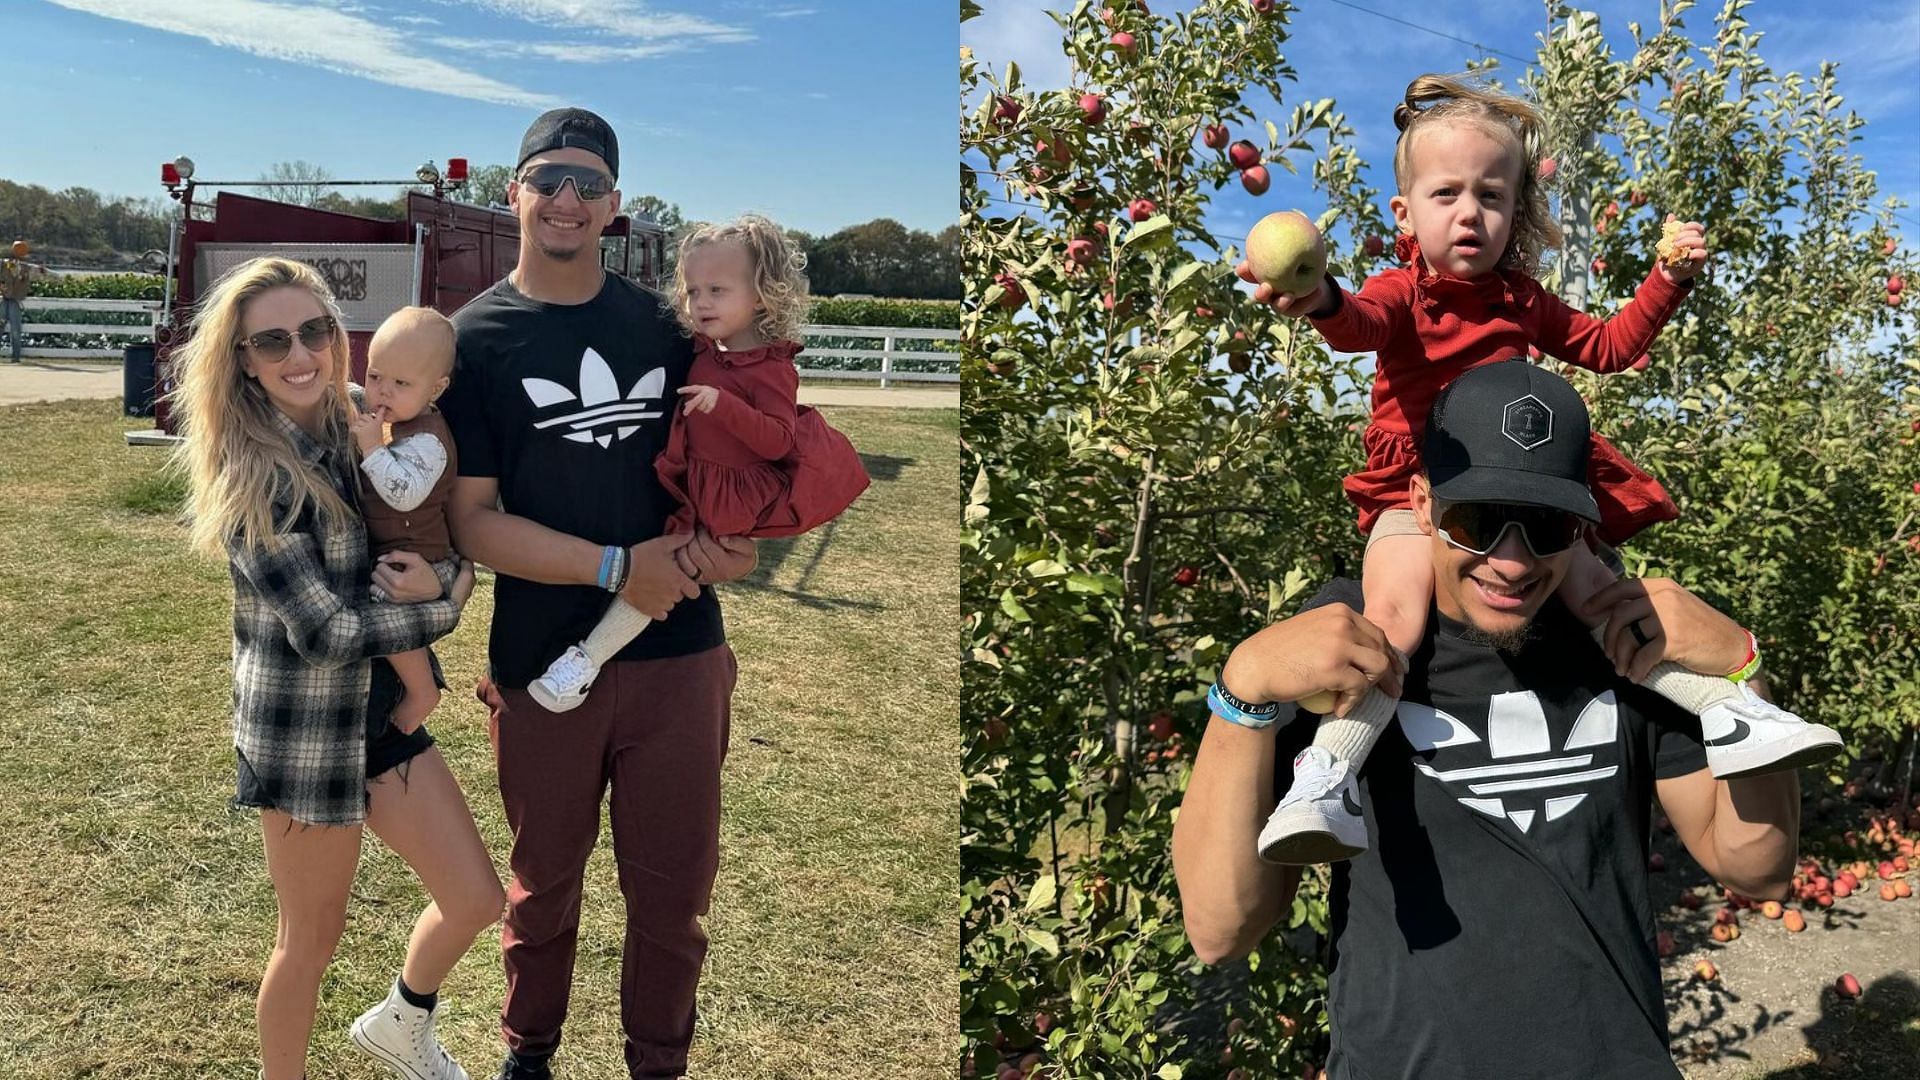 Patrick Mahomes, wife Brittany take much-needed break with kids to celebrate fall